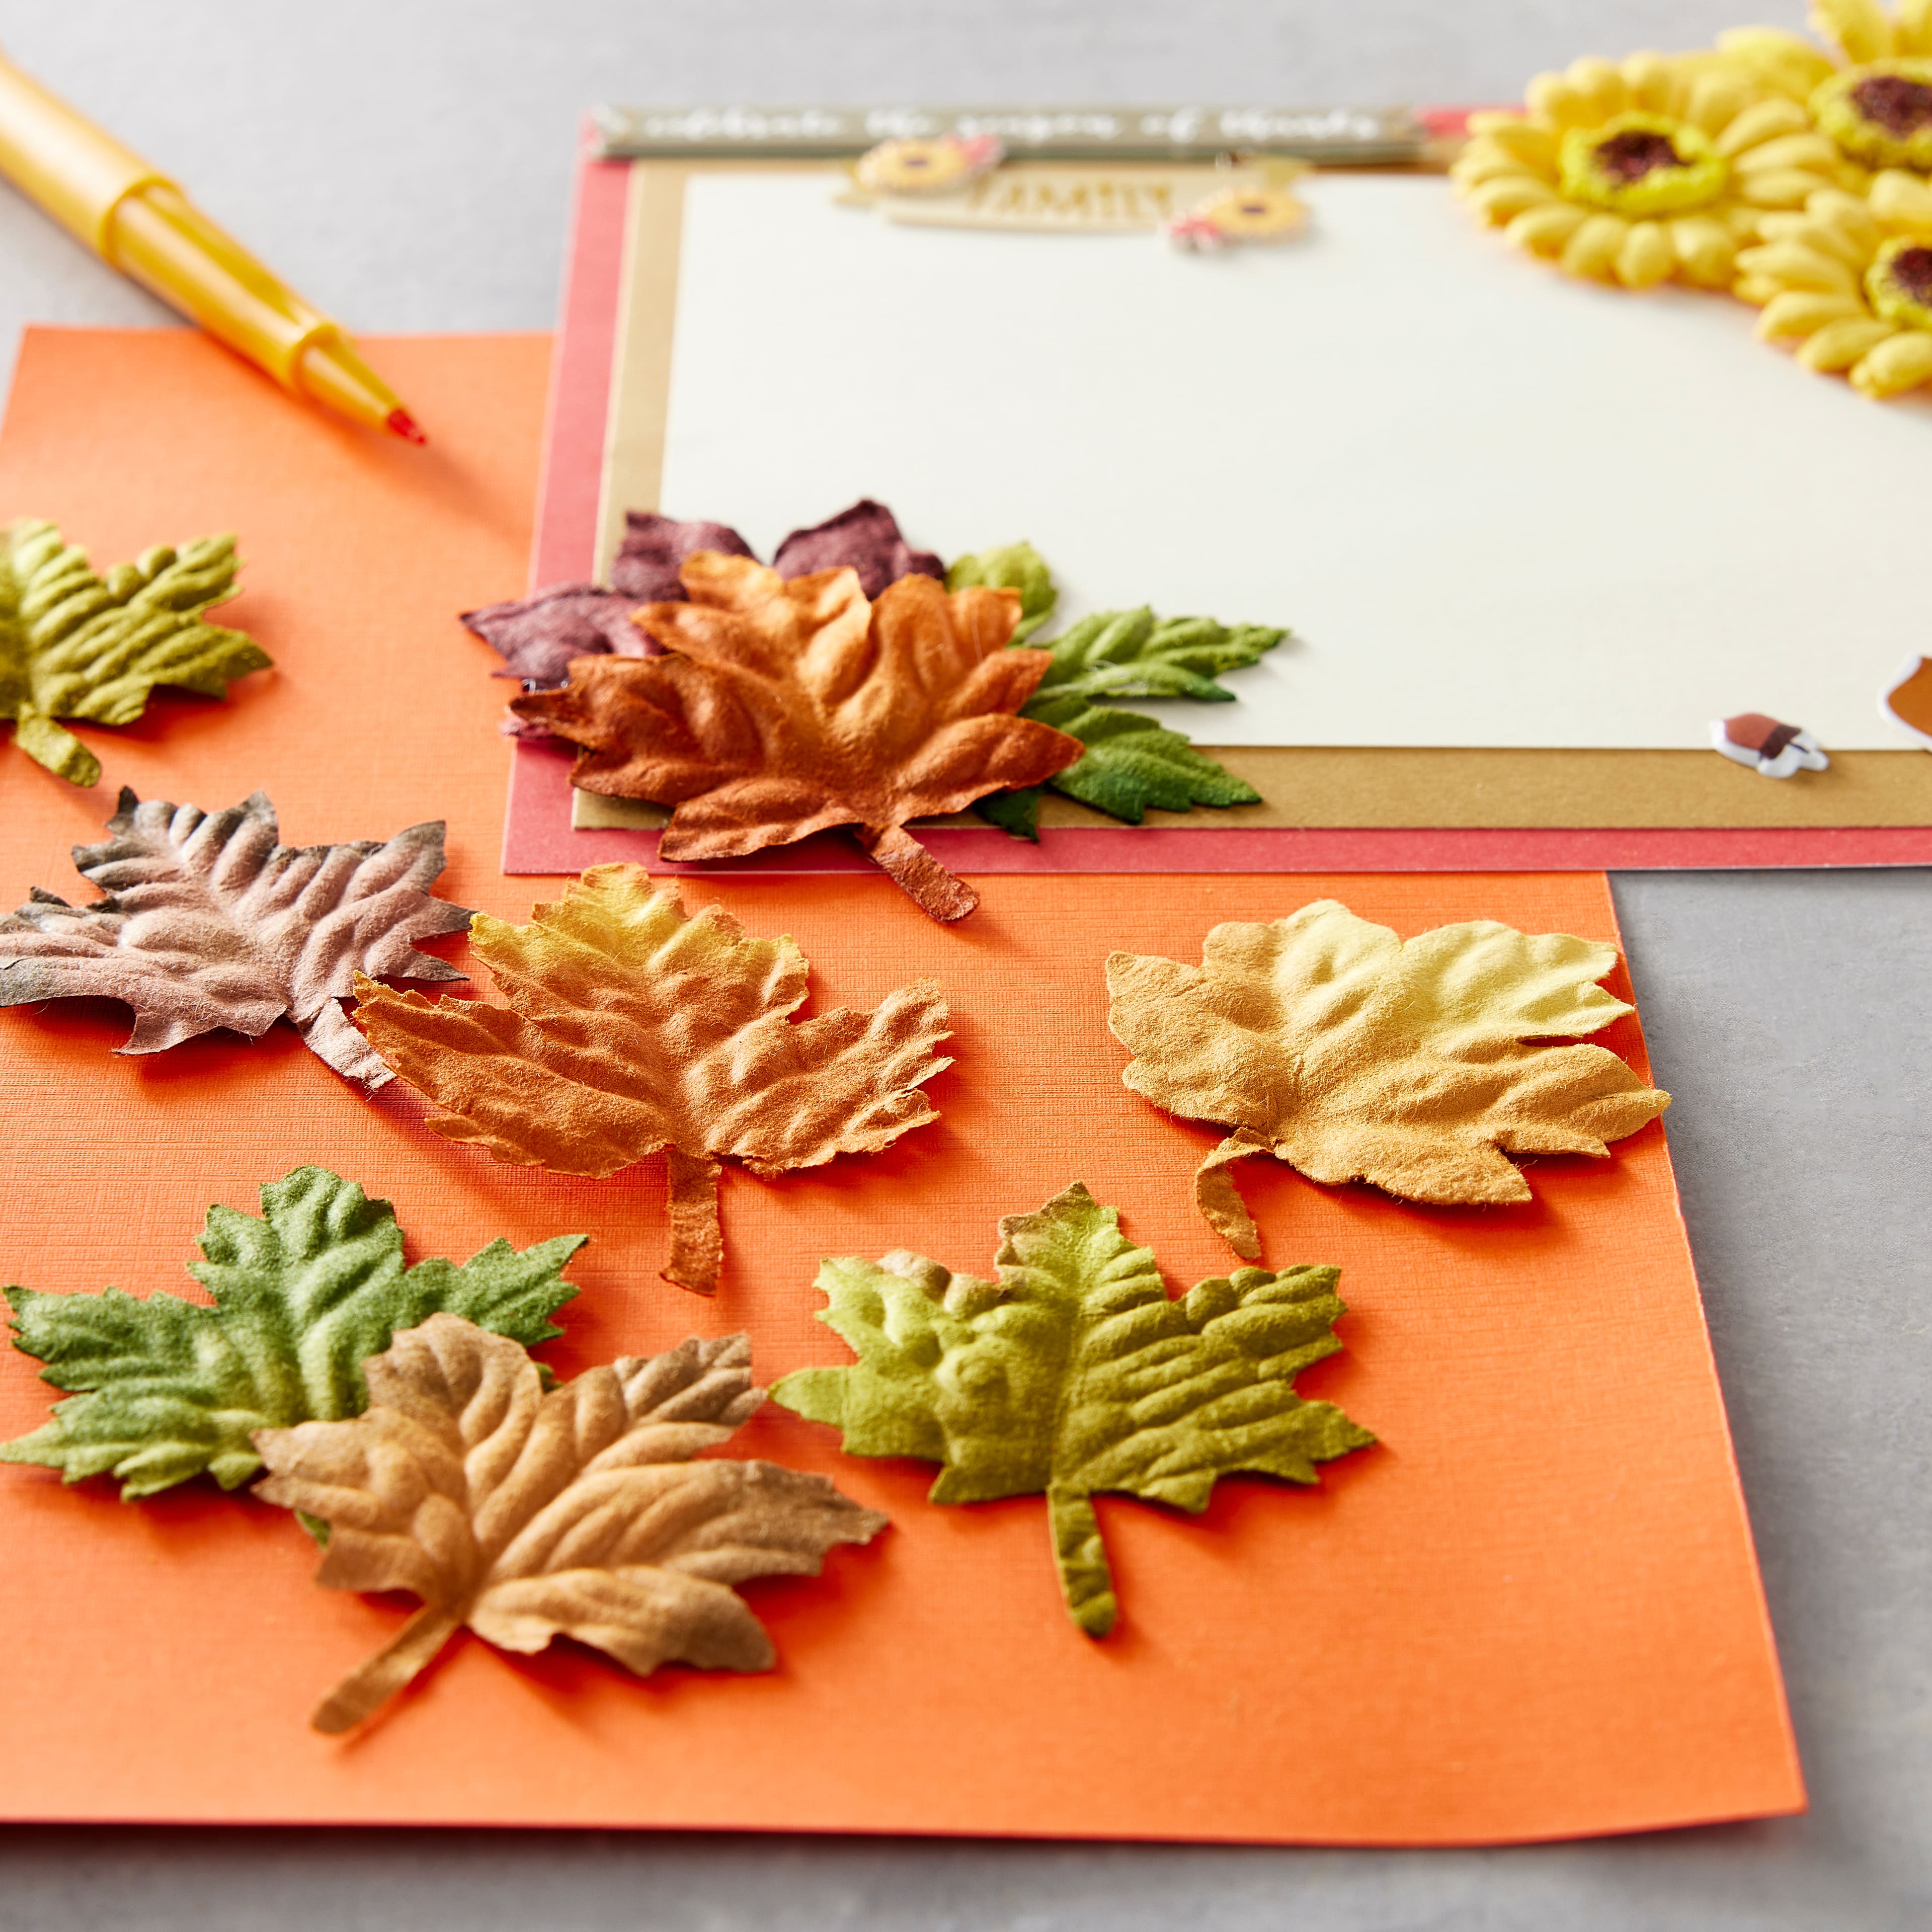 Glitter Leaves Craft - An Upcycled Book Craft * Moms and Crafters